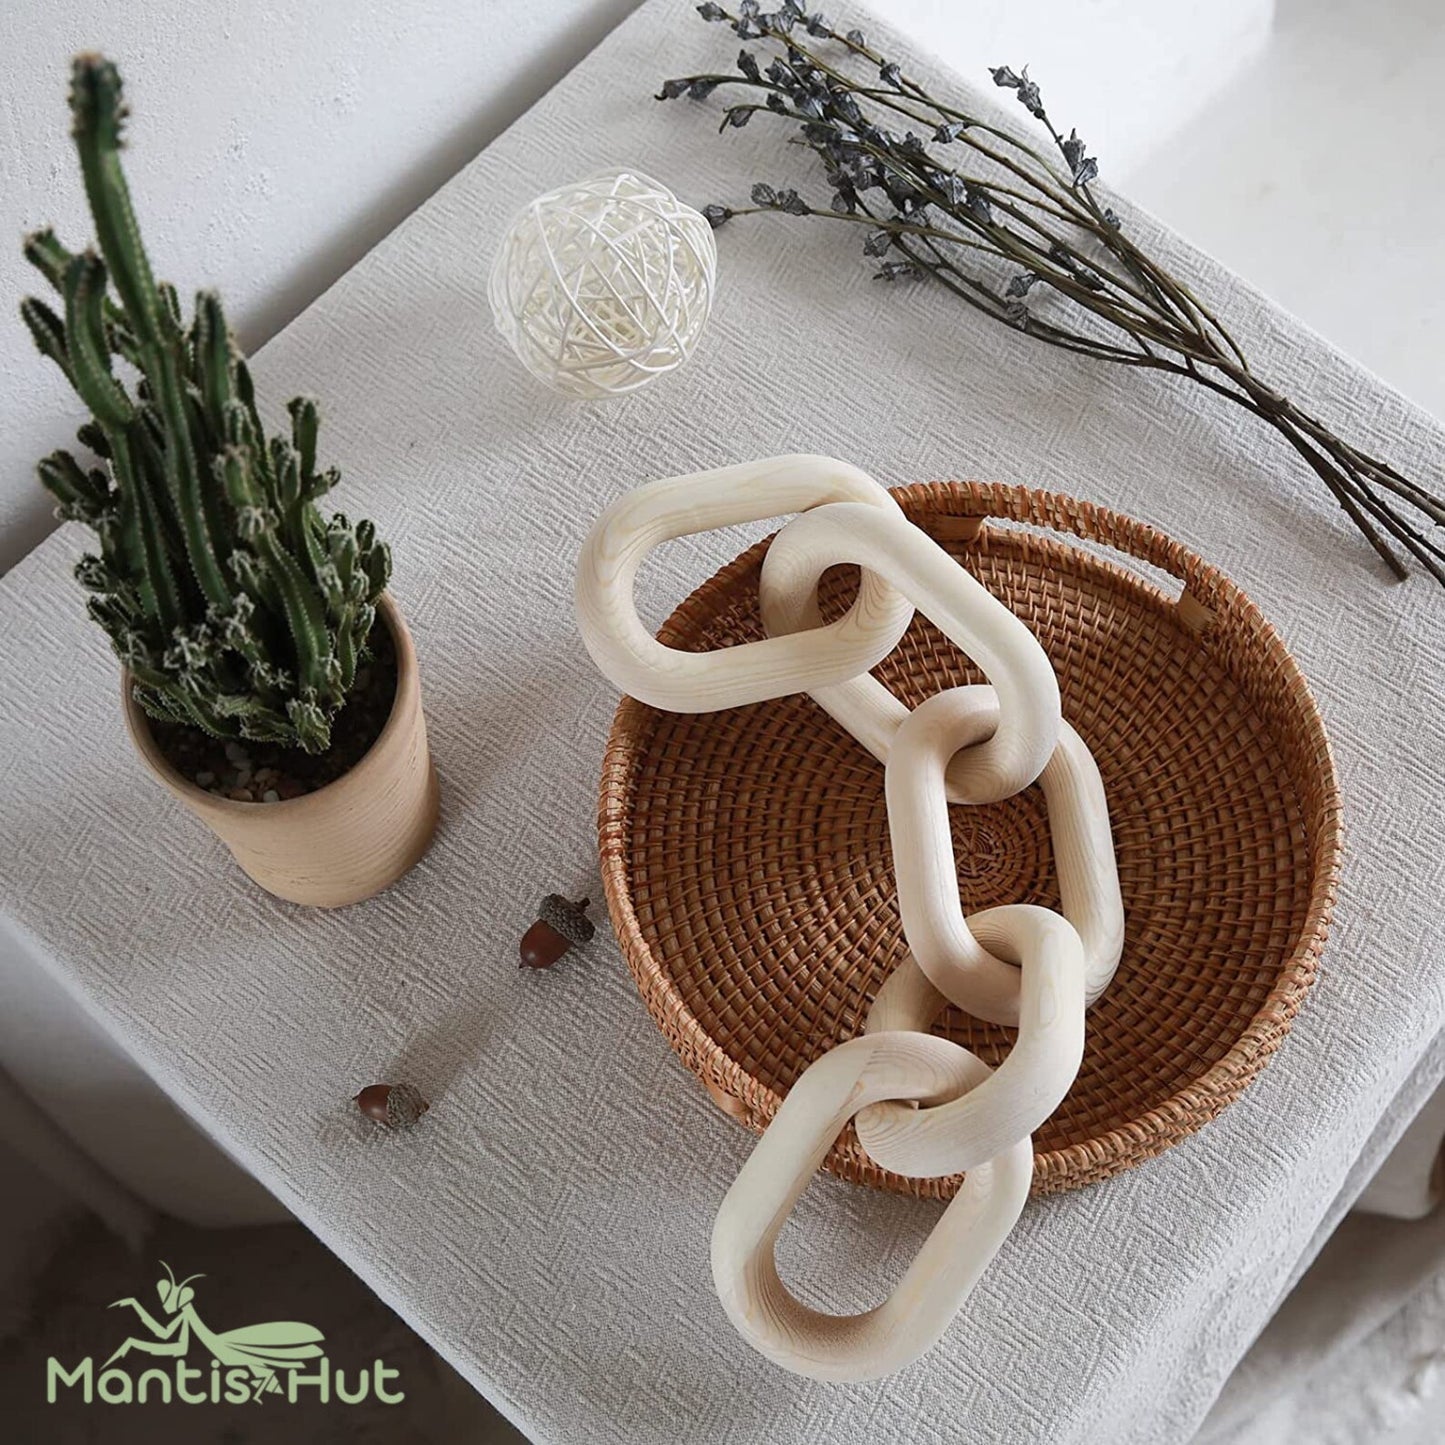 Wood Chain Link Decor, Hand Carved Pine Wood Chain Decor, Modern Farmhouse Decor Set, Wood Chain Link and Bead Garland Set, 21.6 inches link